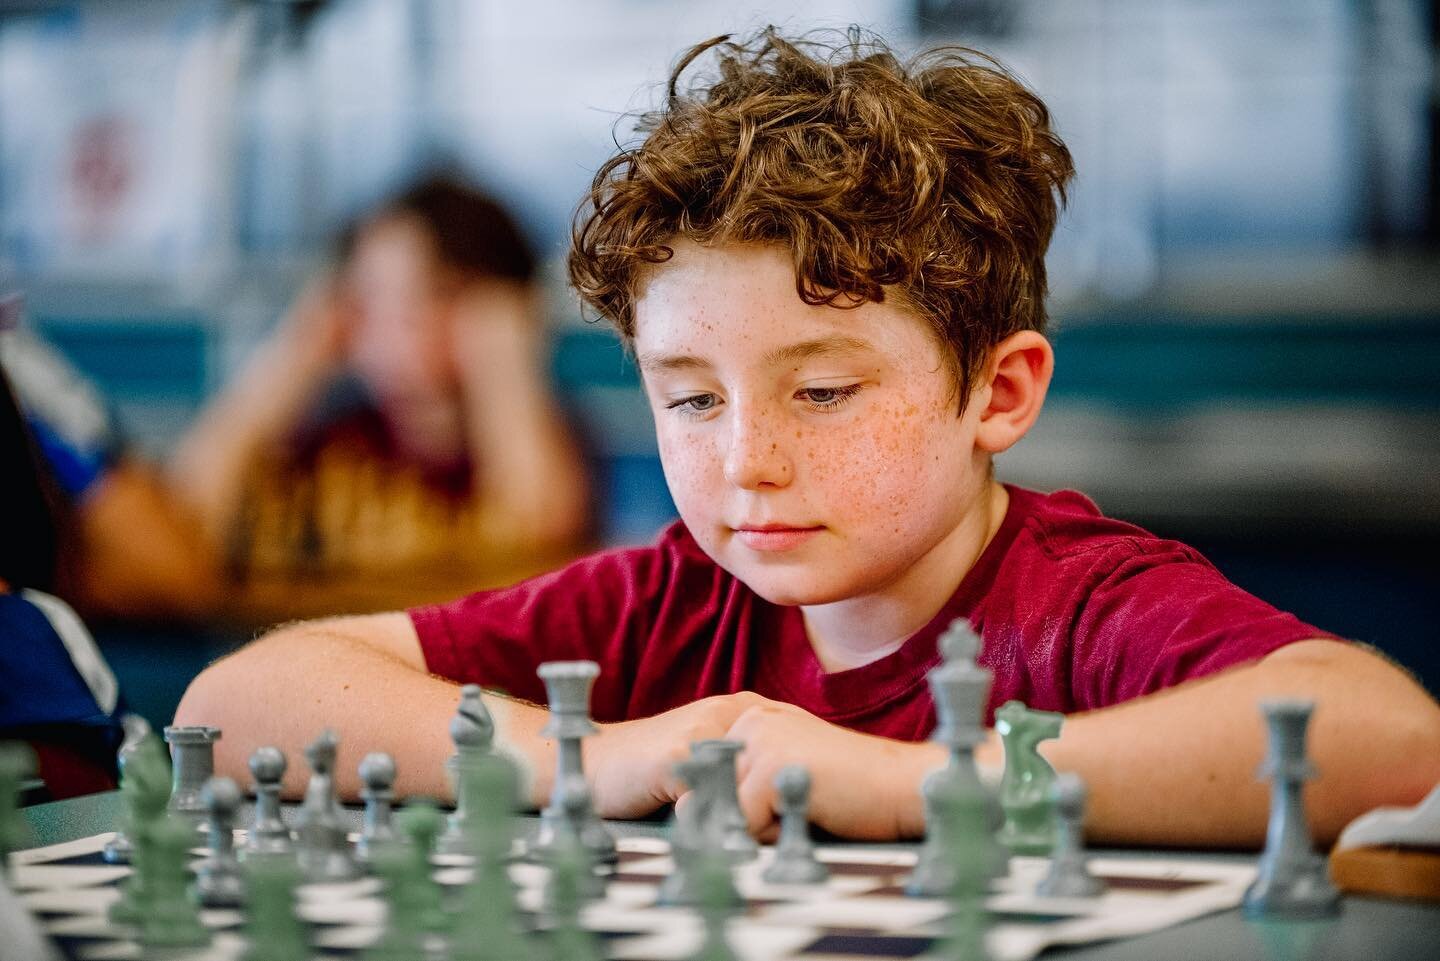 Happy Wednesday! We love seeing our students&rsquo; back to school photos! ✏️📚 We wish everyone a great school year!♟
🔘
🔘
🔘
#chess #tampachess #chesseducation #chesskids #kidschess #chesskid #chesslover #chessmaster #chessmoves #chessnotcheckers 